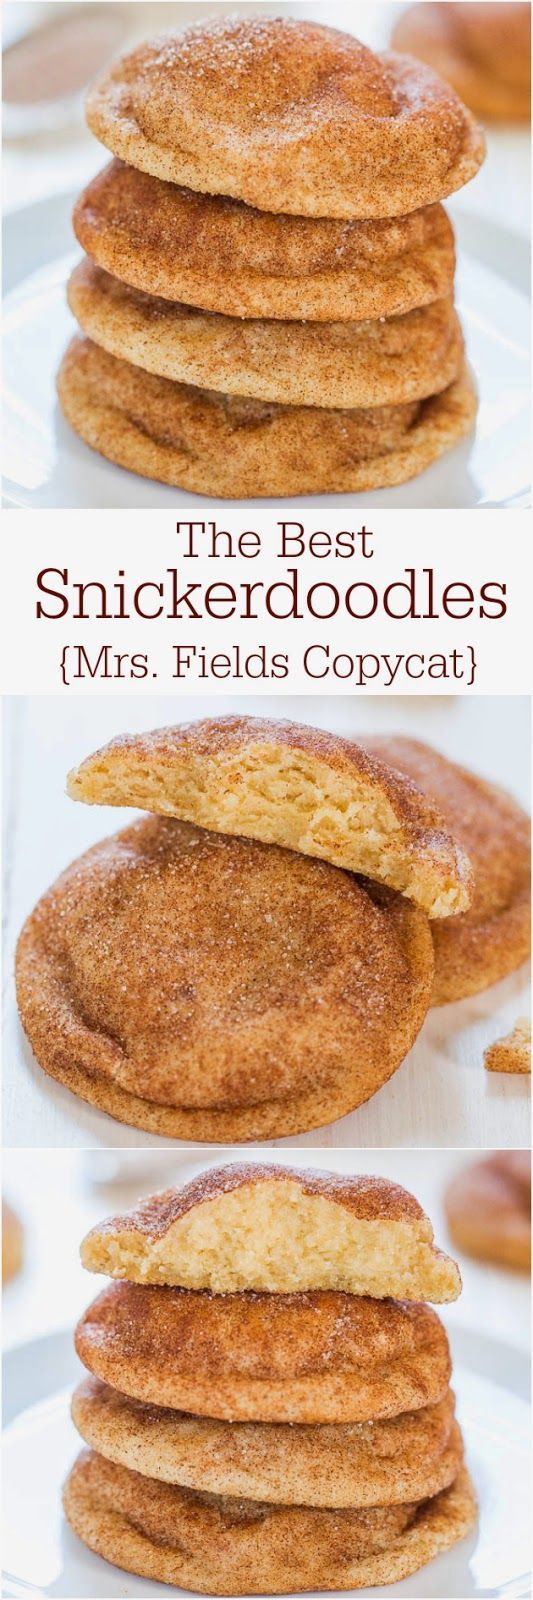 This snicker doodle recipe is crazzzy yummy!  It was quick and easy to make and the kids loved it!